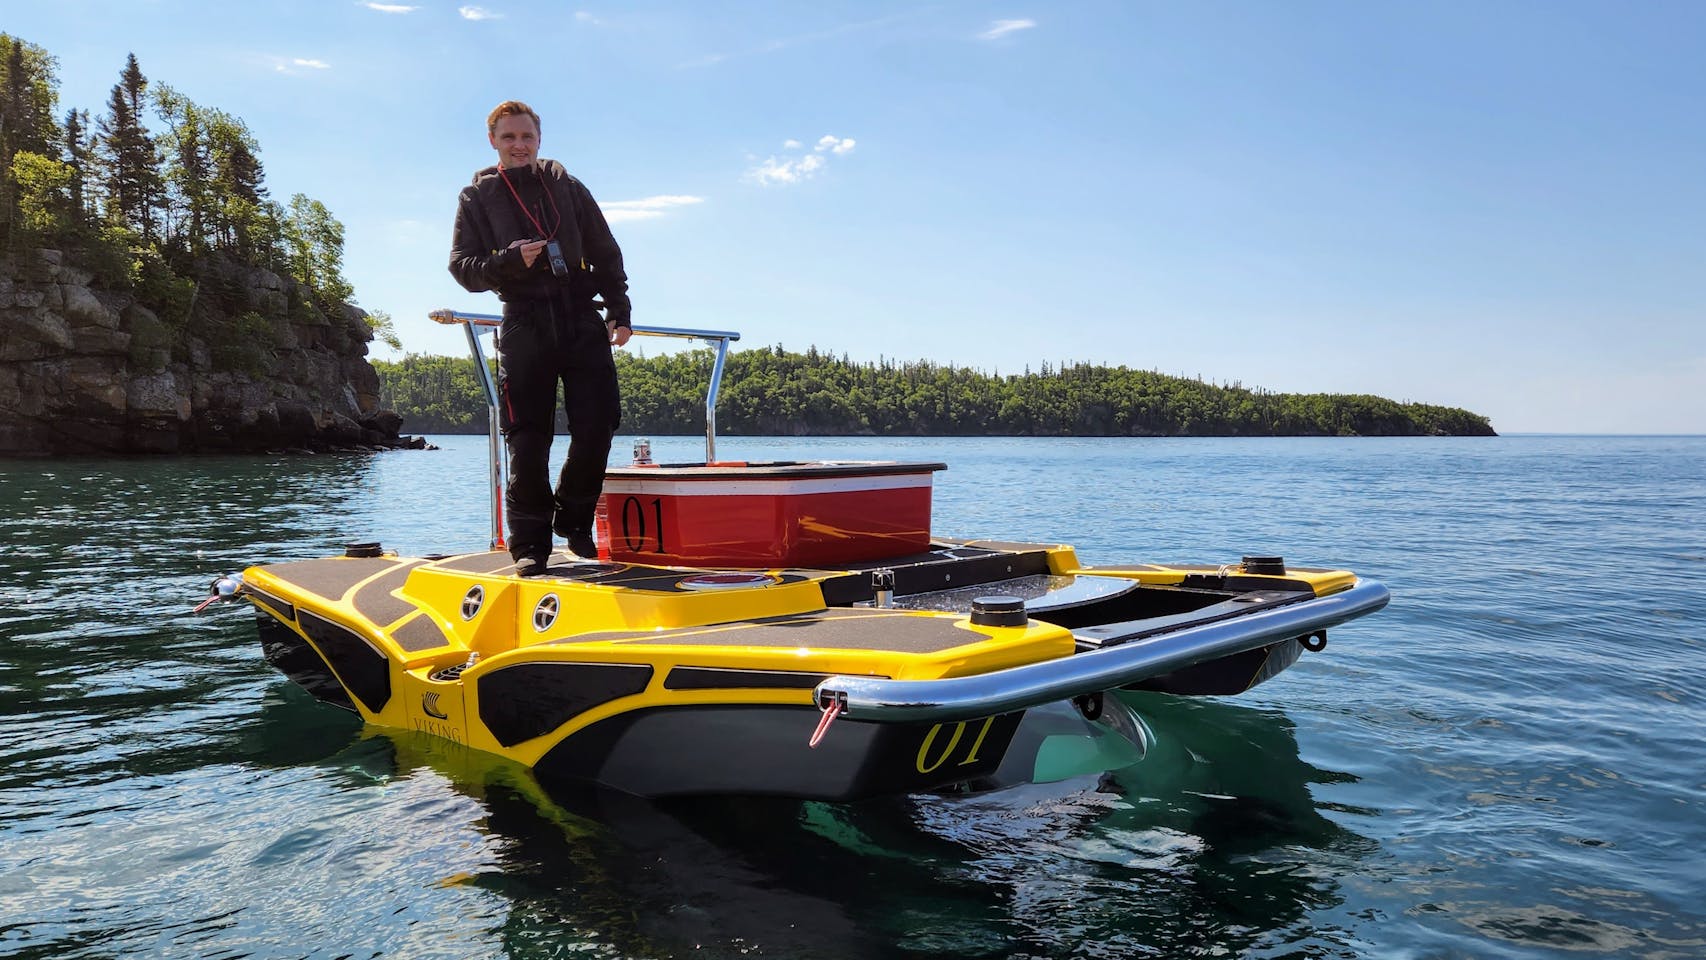 A Viking submarine pilot waited for passengers to come aboard, next to tiny Pyritic Island in Lake Superior.